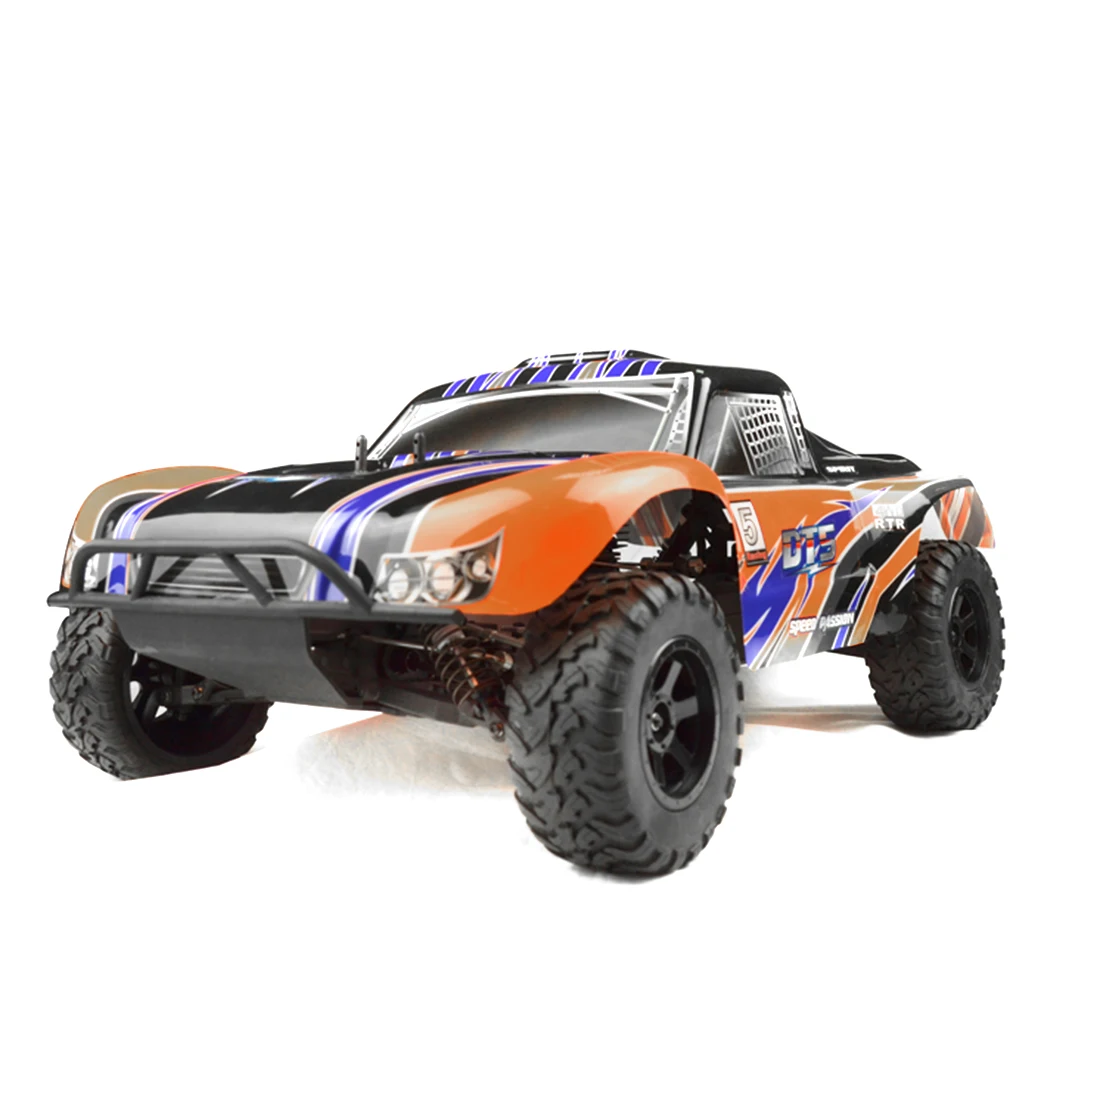 1:10 4WD Brushless Methanol Fuel Remote Control Car High Speed Short Course Model Truck Educational Toy- R0097 R0092G R0079